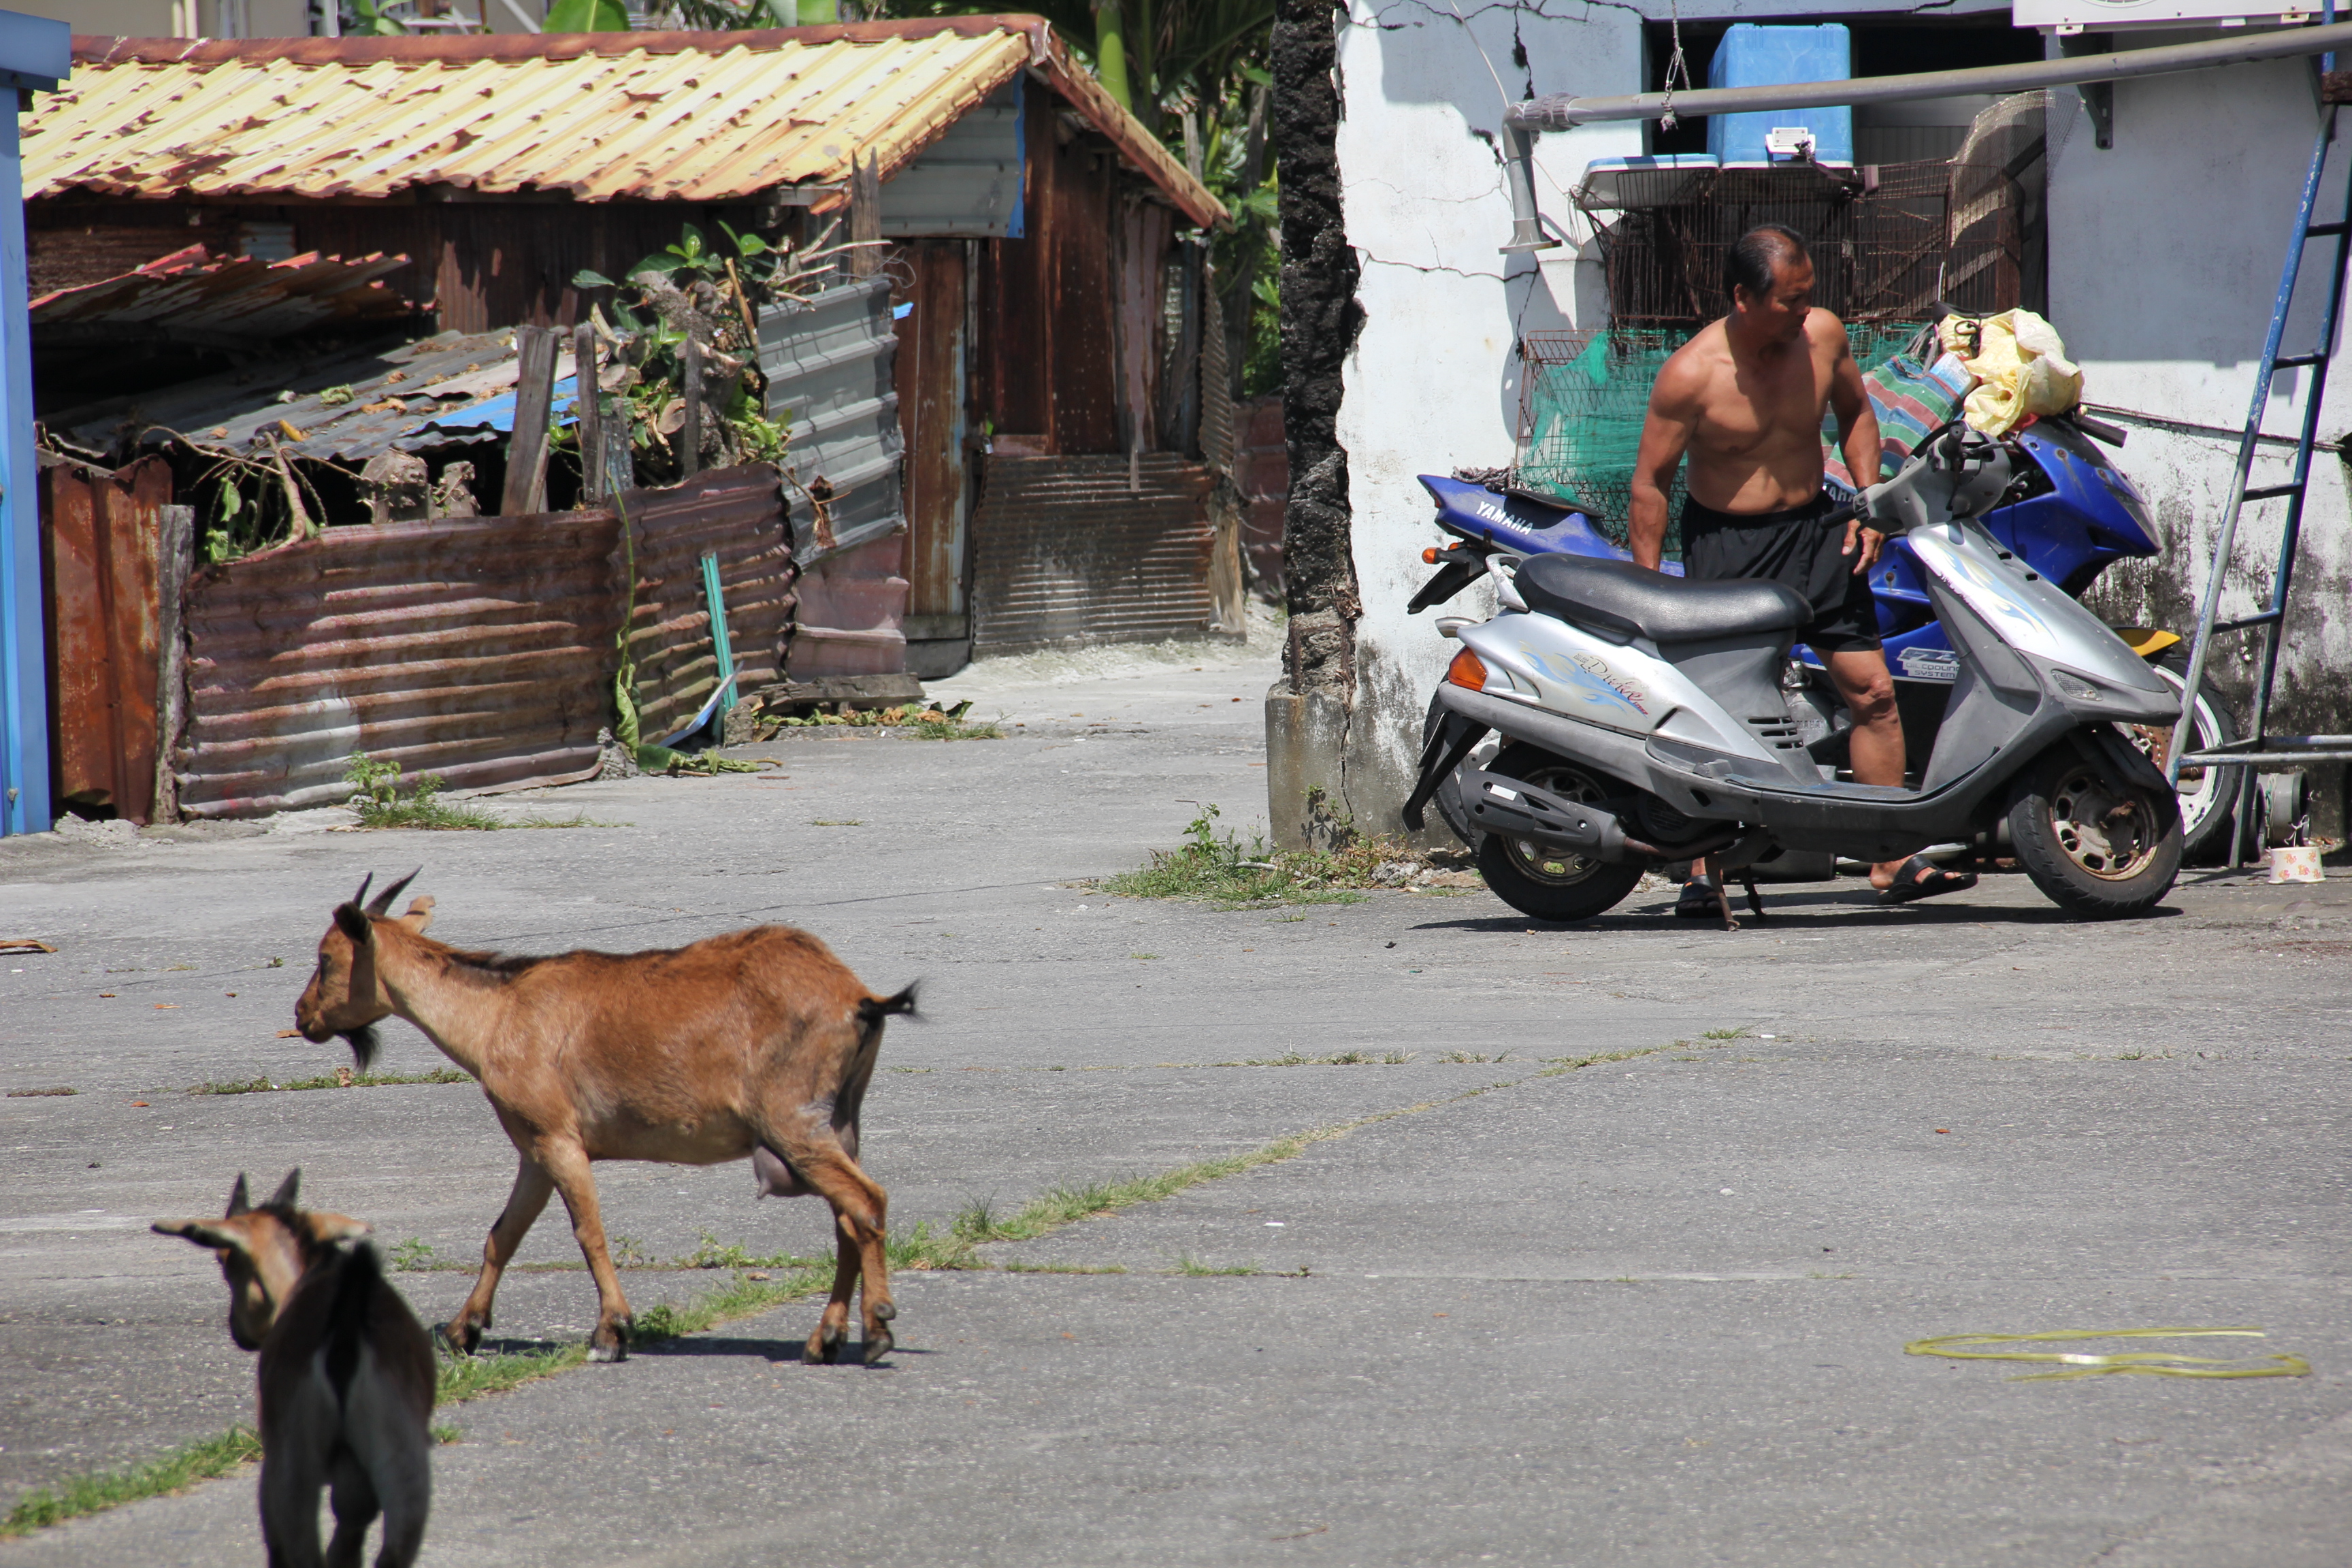 Residental street with goats of unknown owners